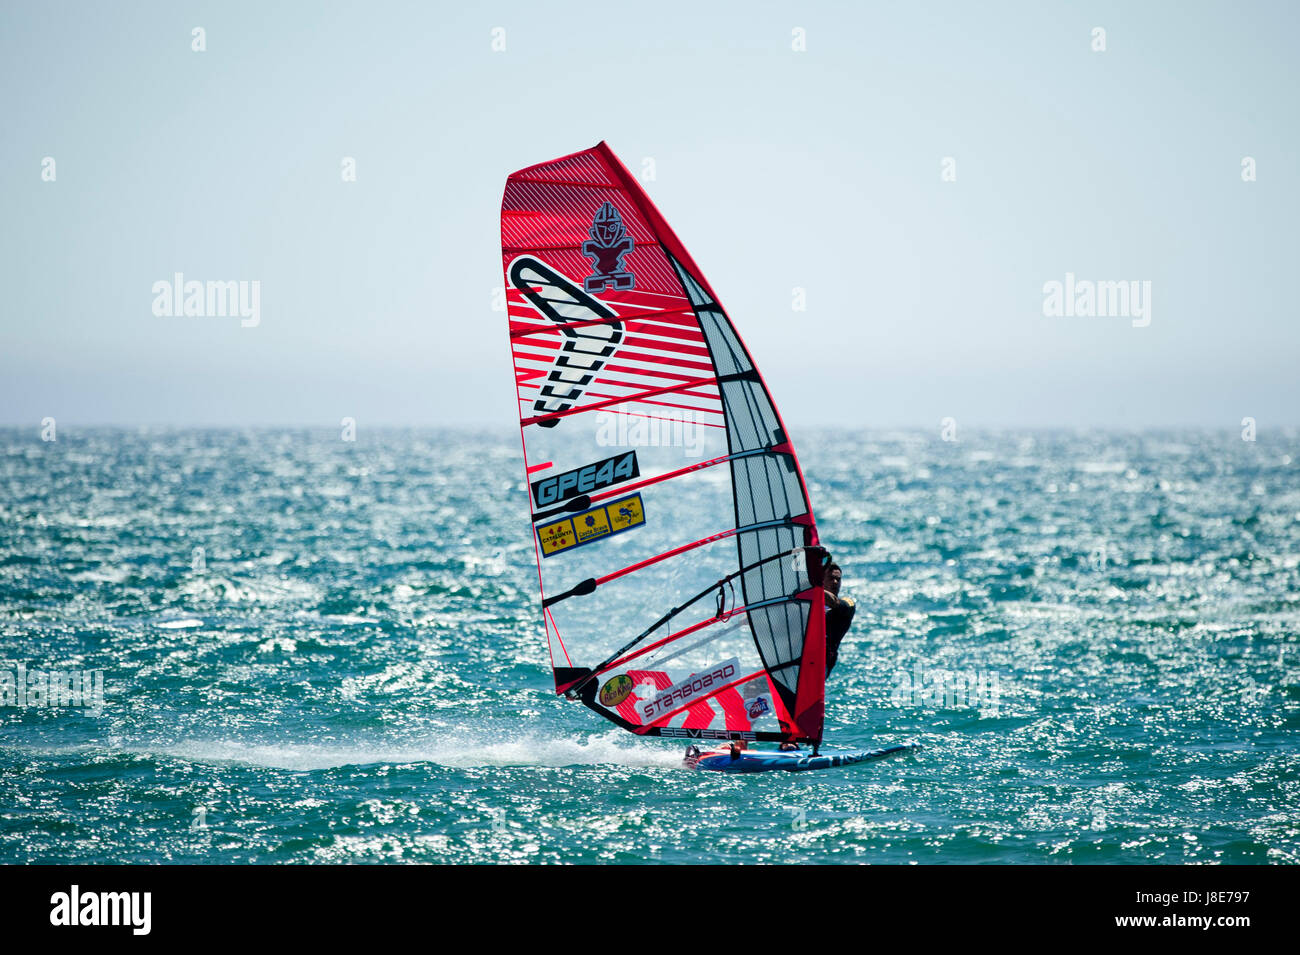 Sant Pere Pescador High Resolution Stock Photography and Images - Alamy